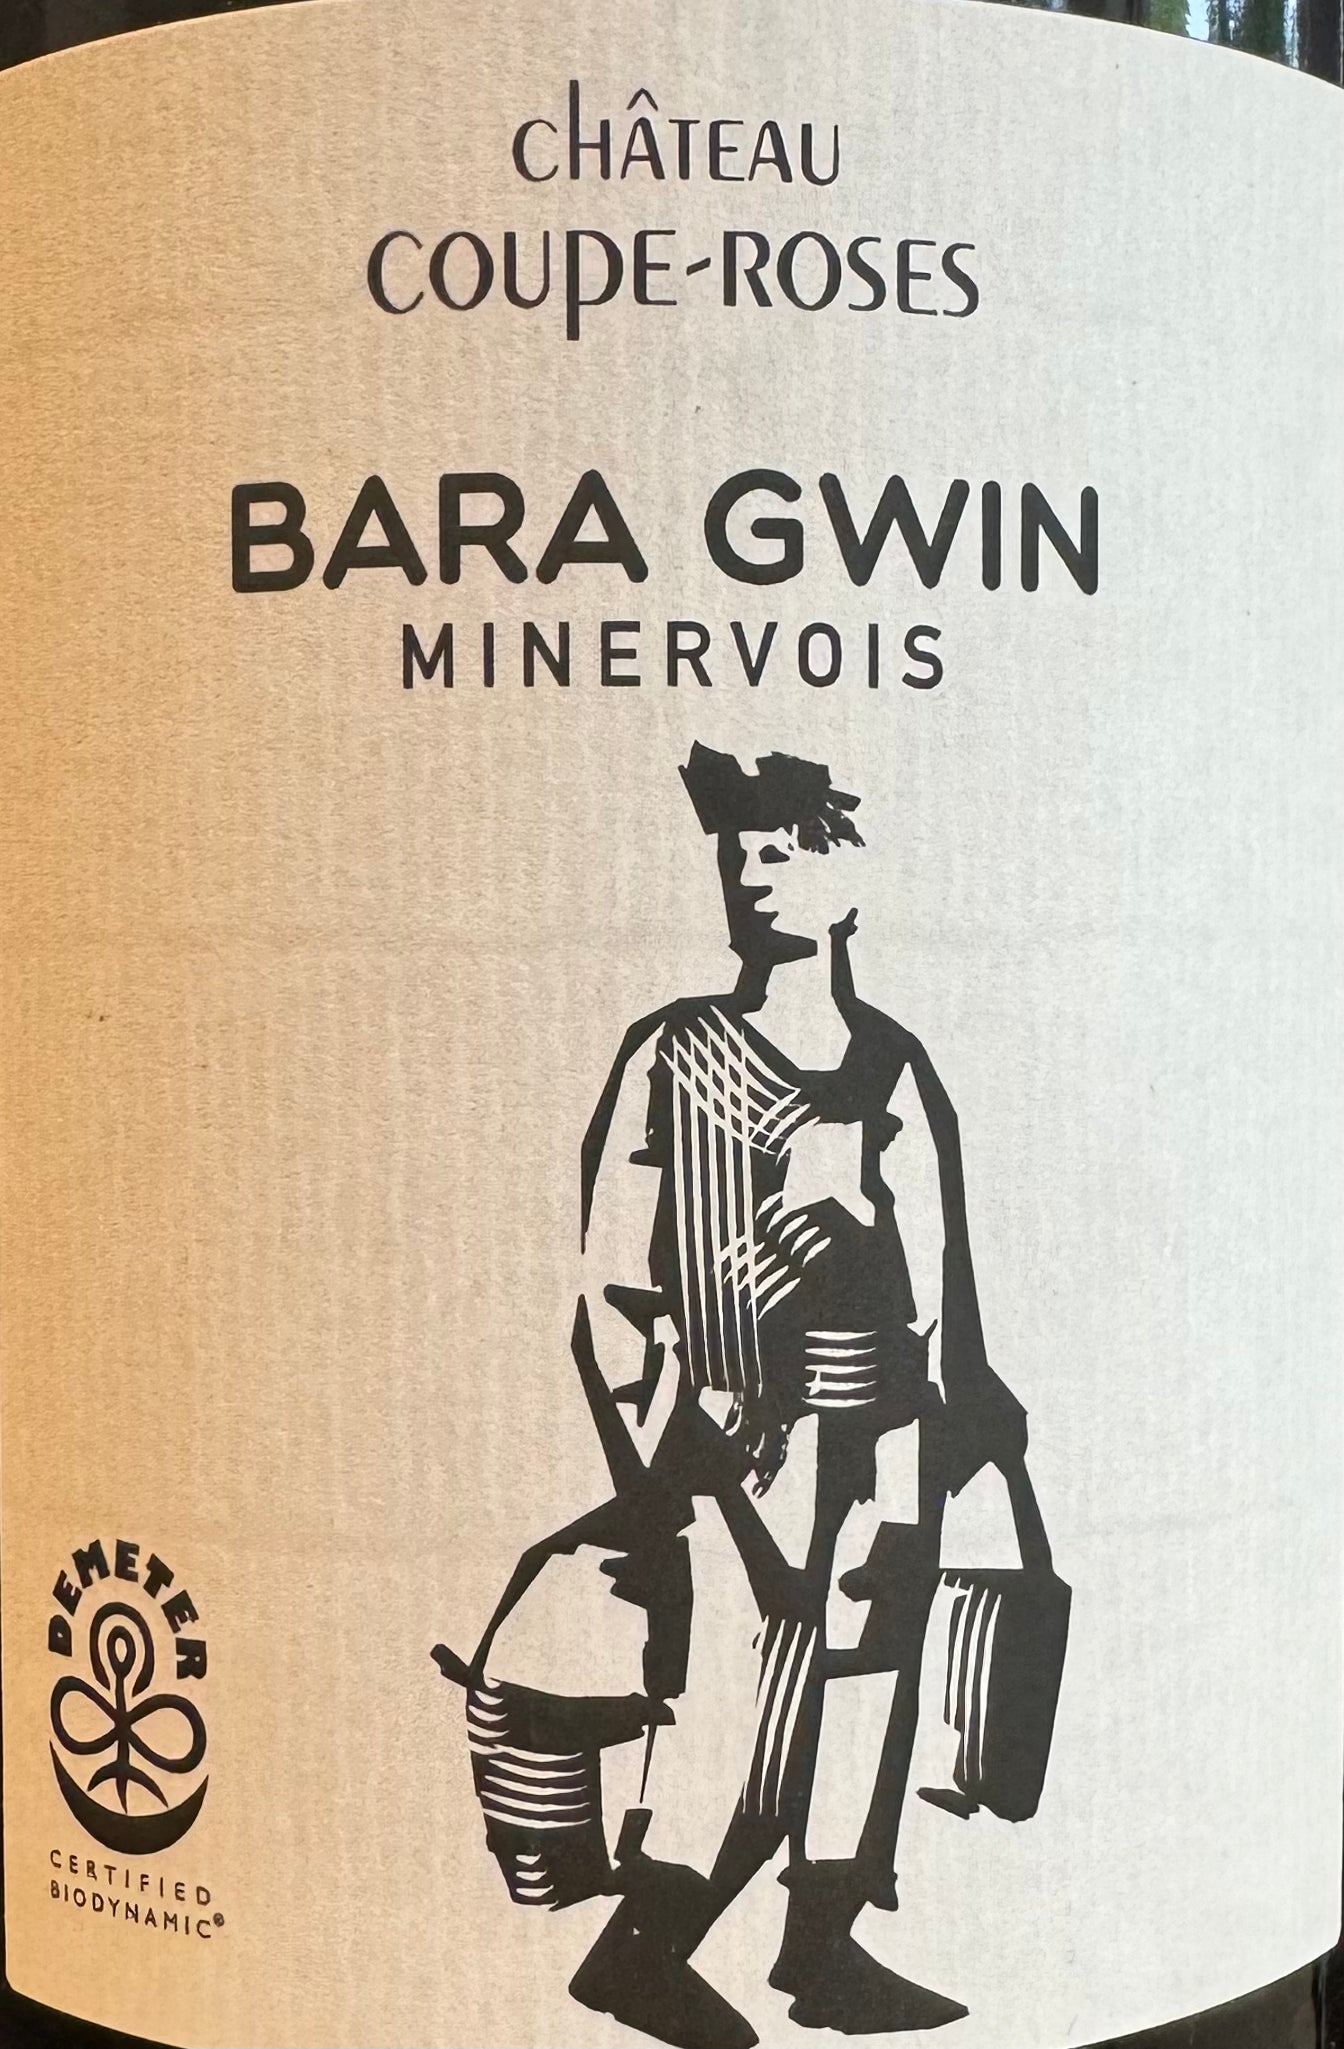 Chateau Coupe-Roses  'Bara Gwin' - Minervois